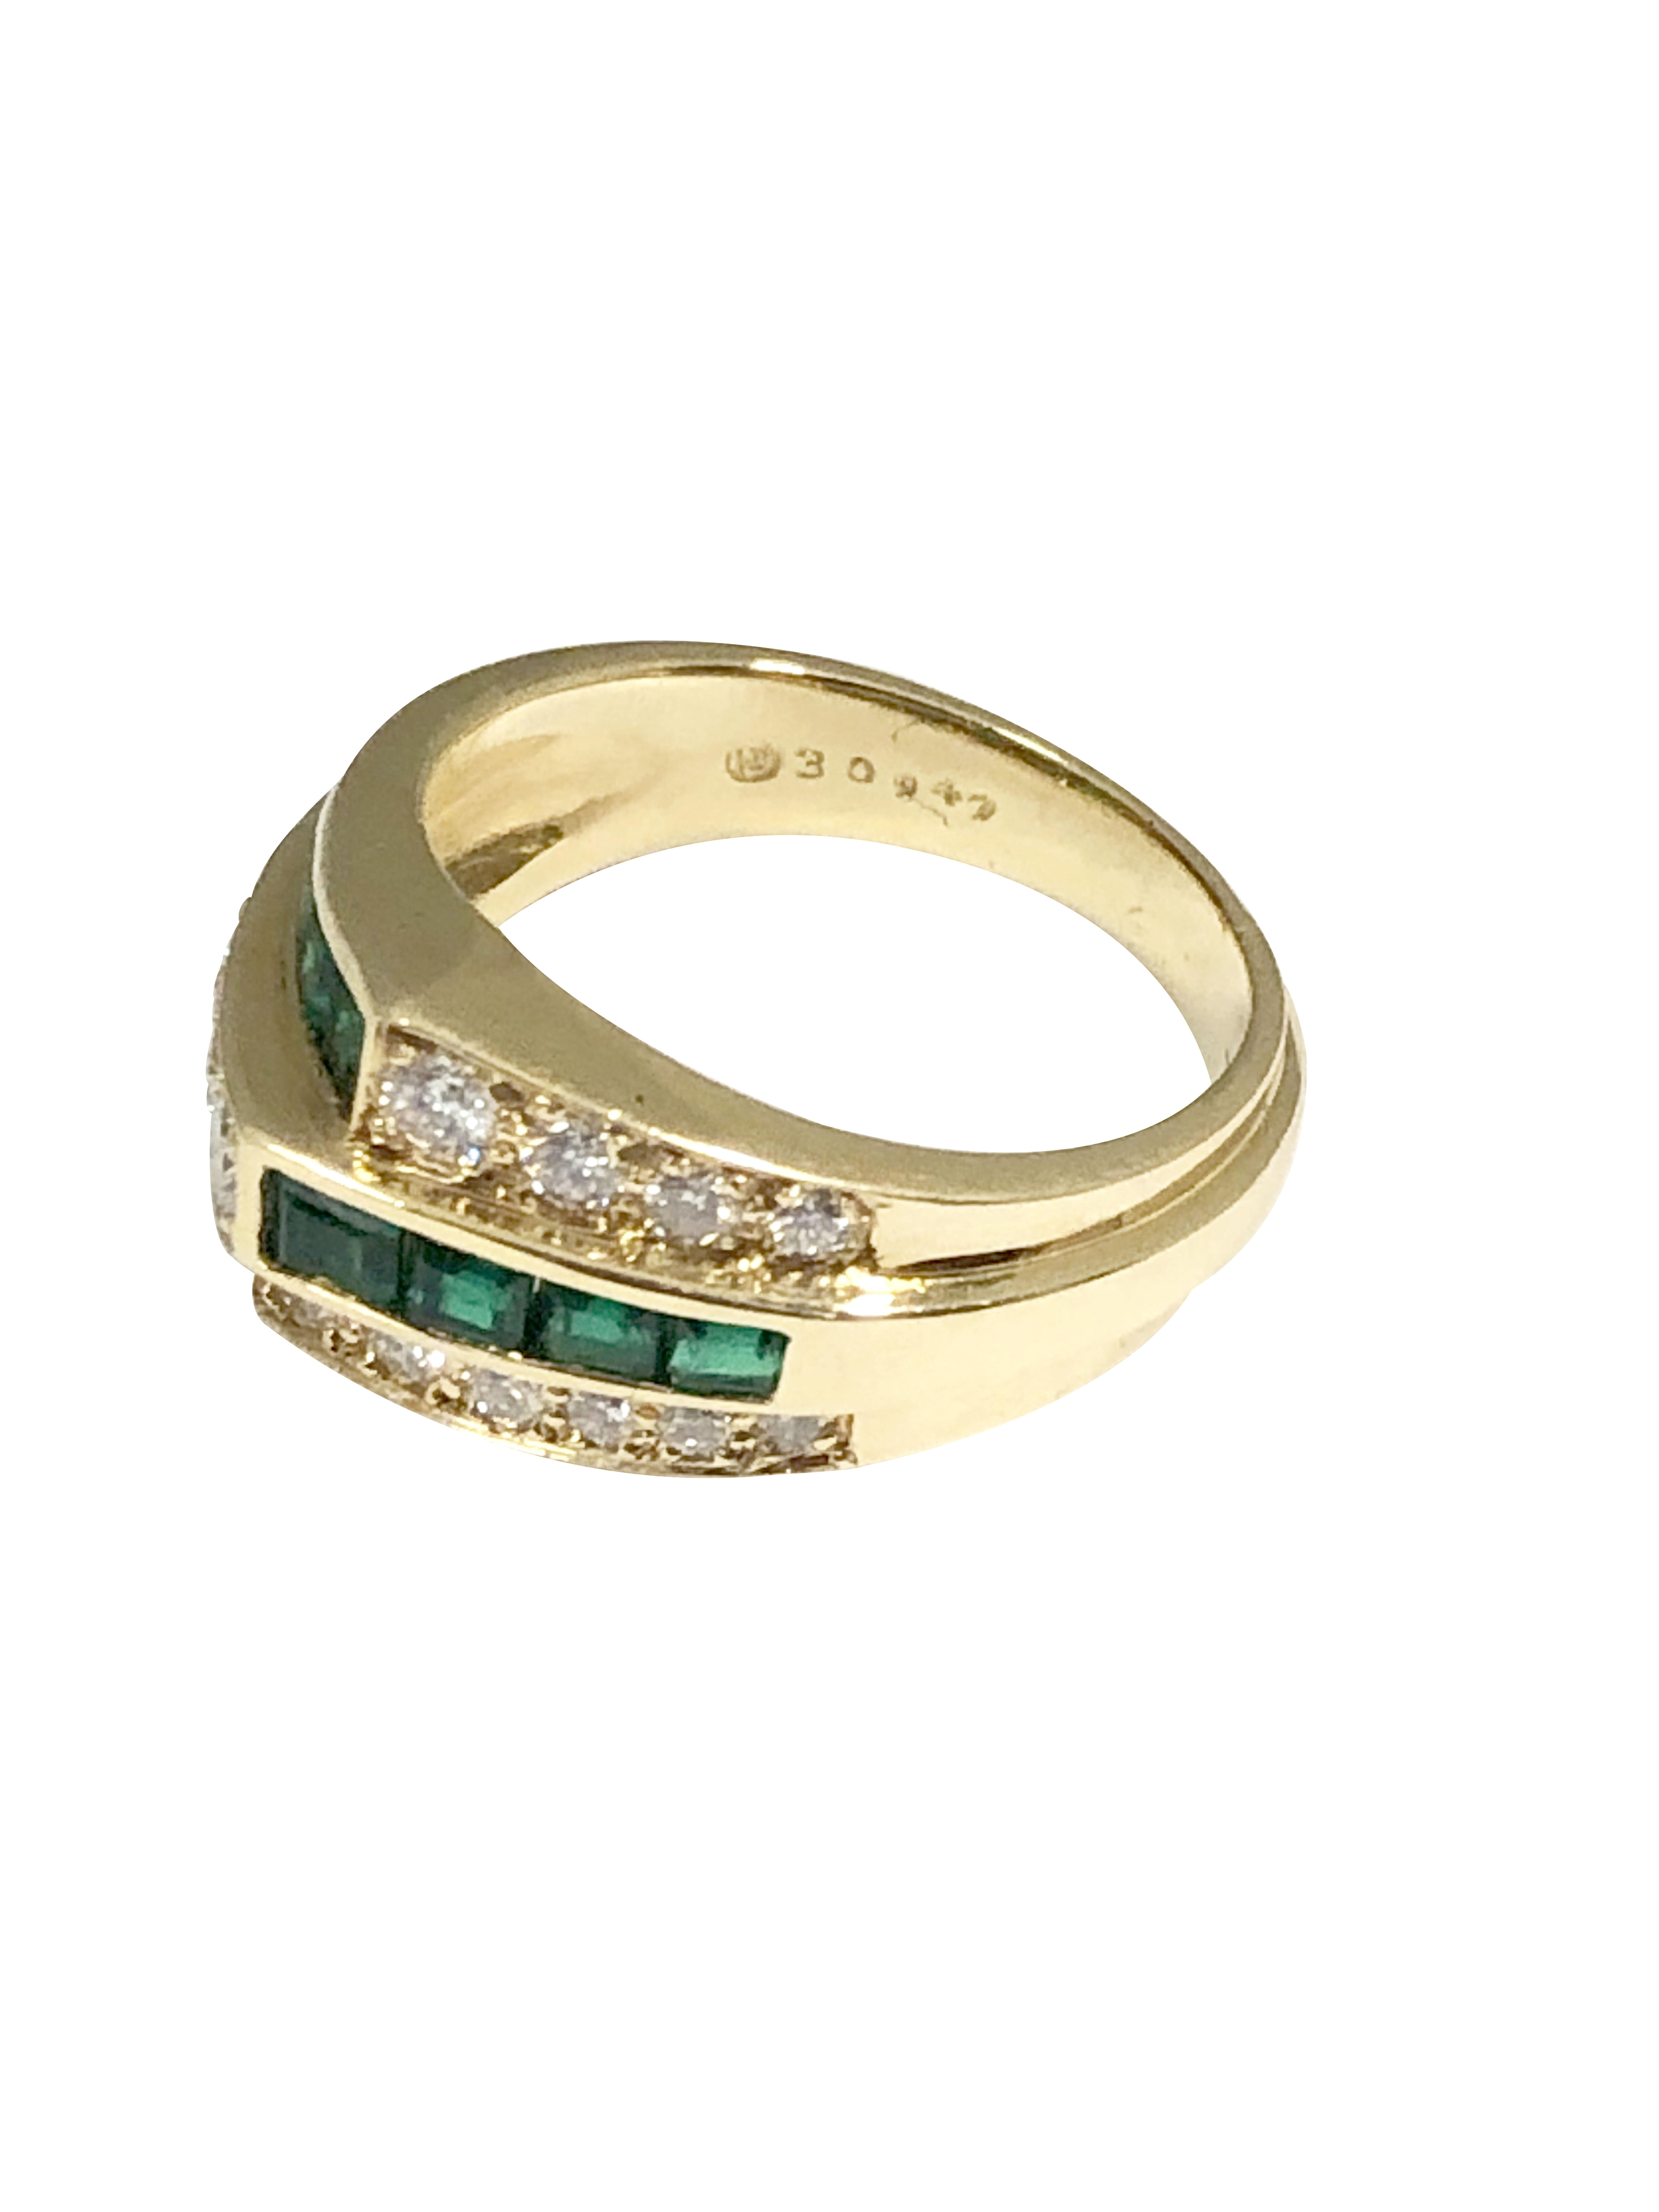 Square Cut Oscar Heyman Yellow Gold Diamond and Emerald Ring For Sale